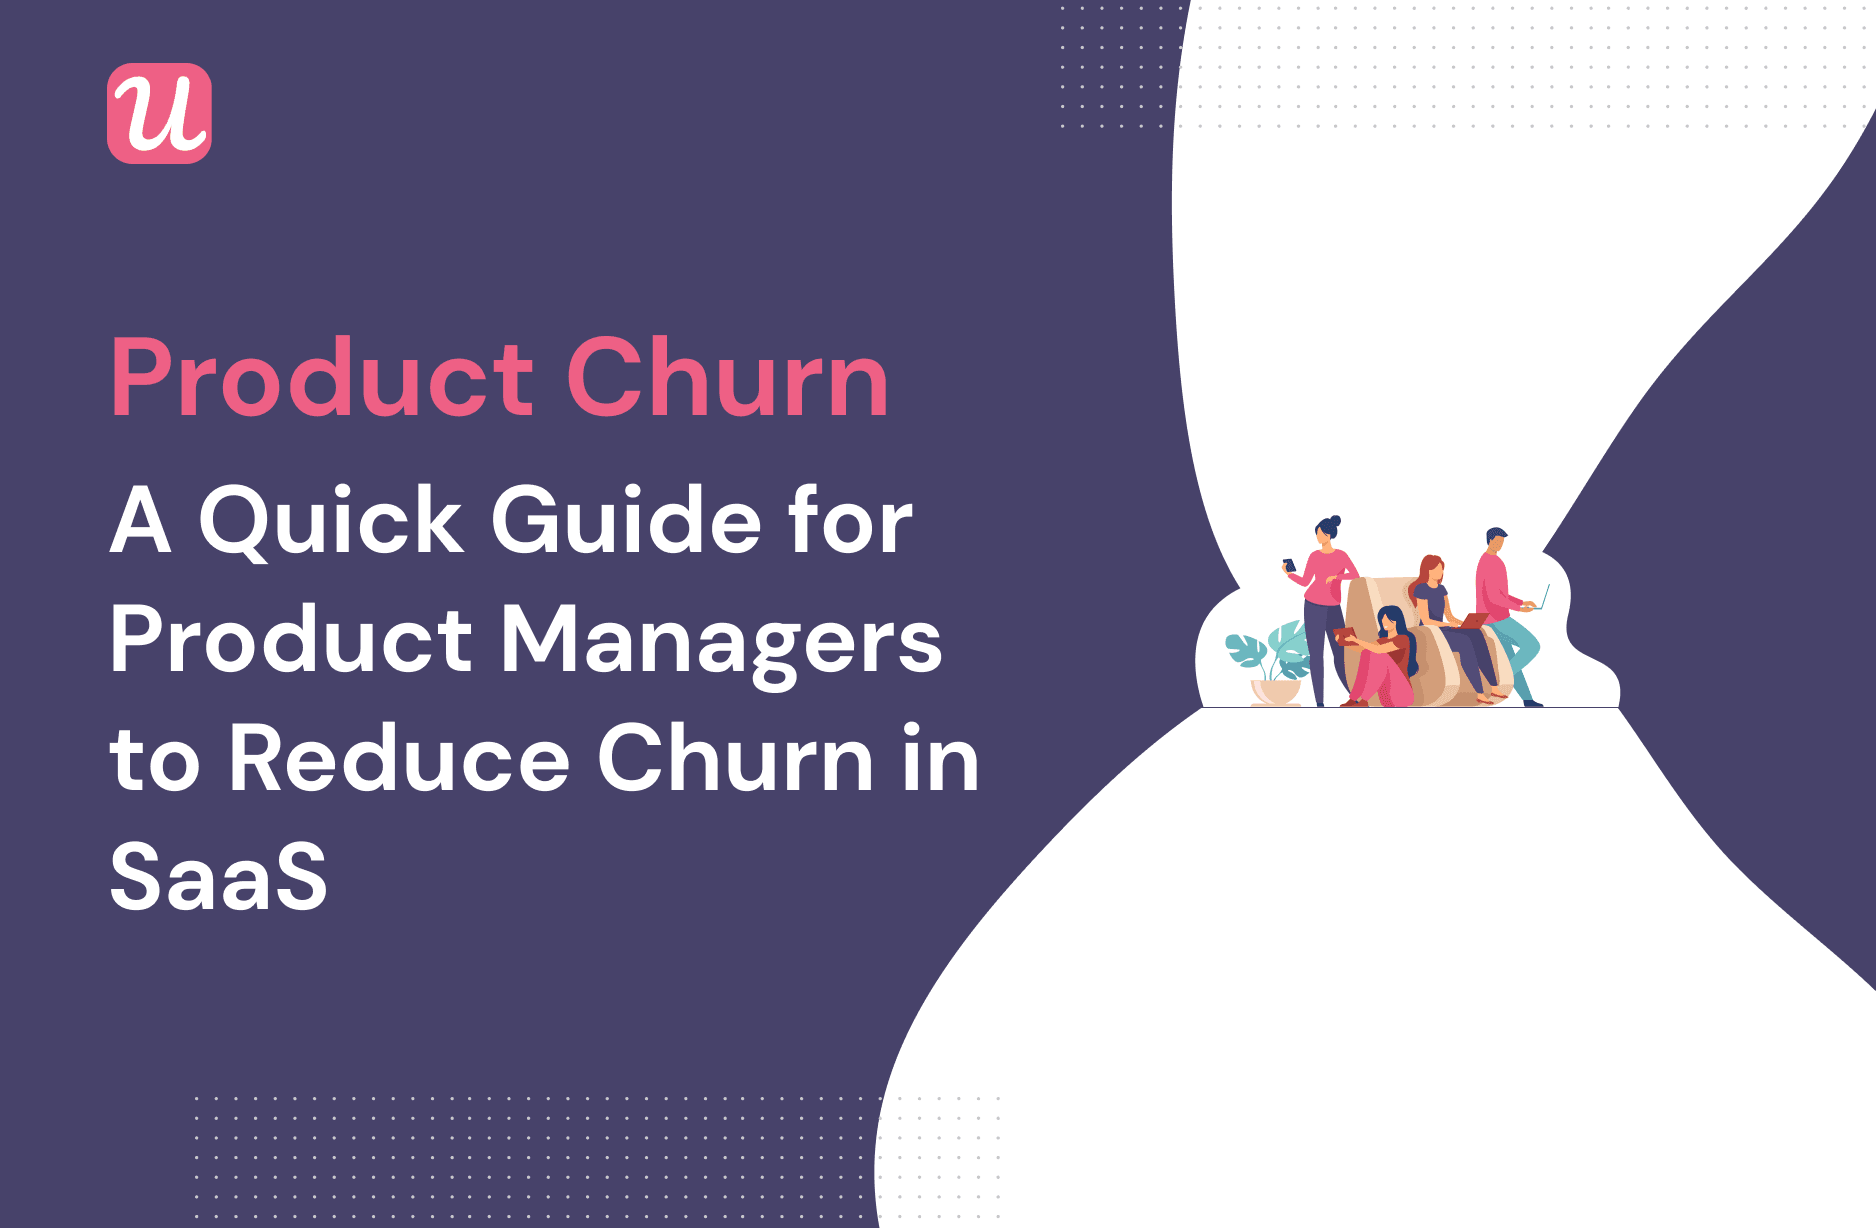 Product Churn: A Quick Guide For Product Managers To Reduce Churn In SaaS